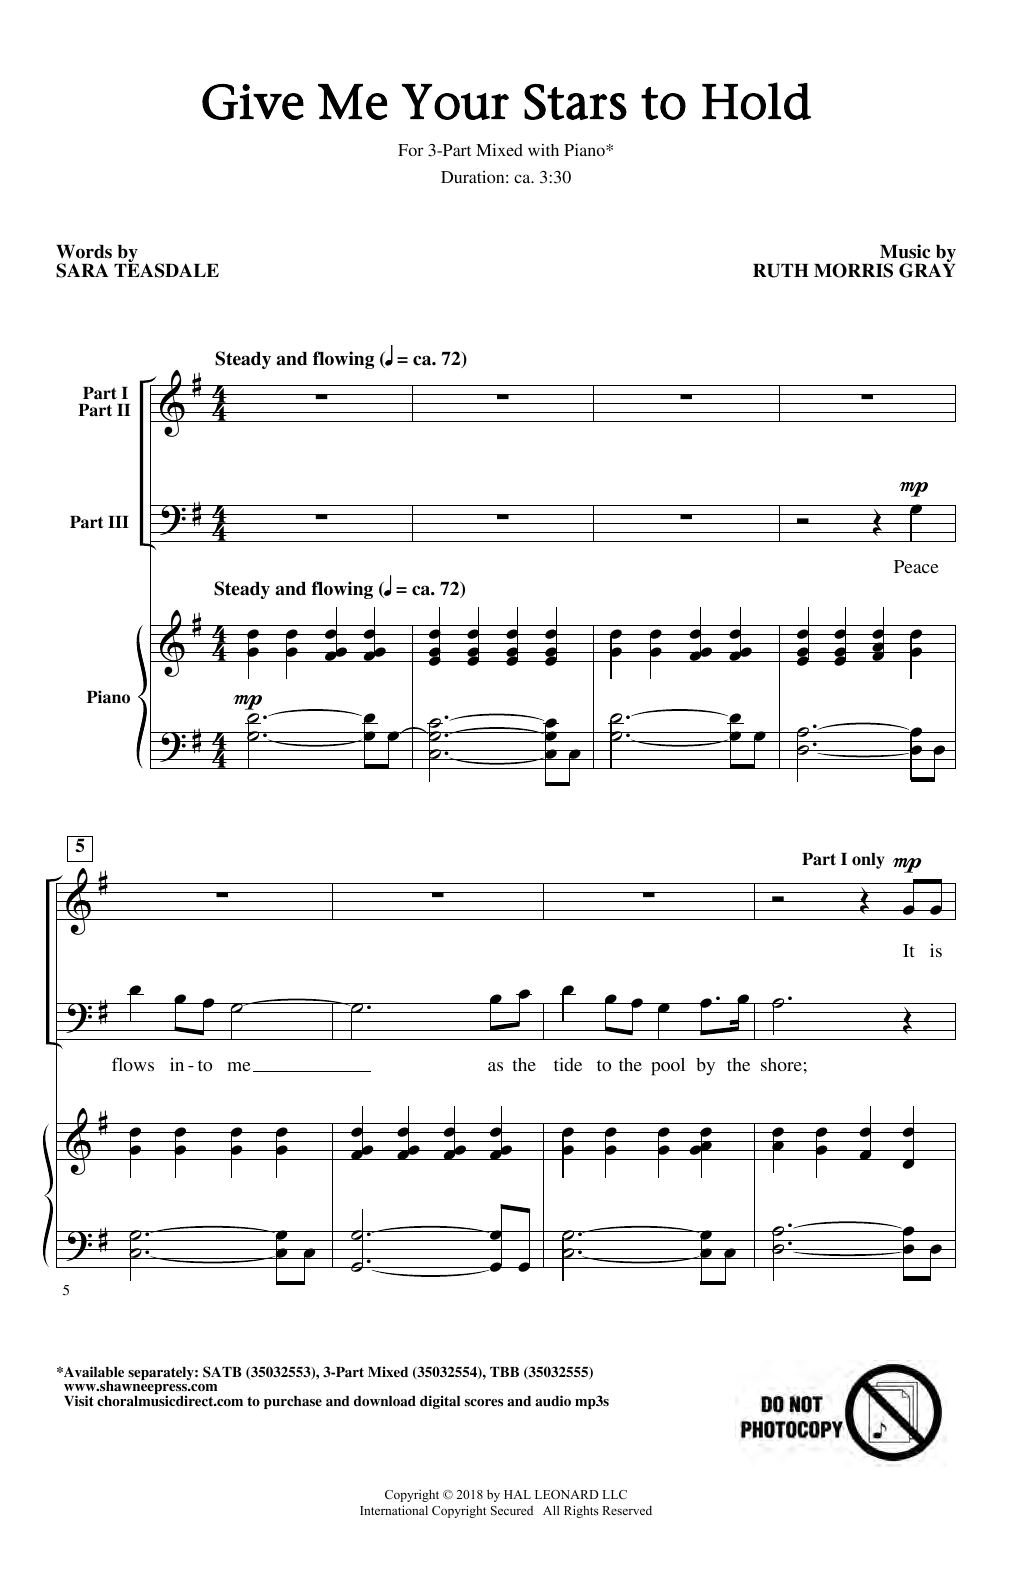 Download Ruth Morris Gray Give Me Your Stars To Hold Sheet Music